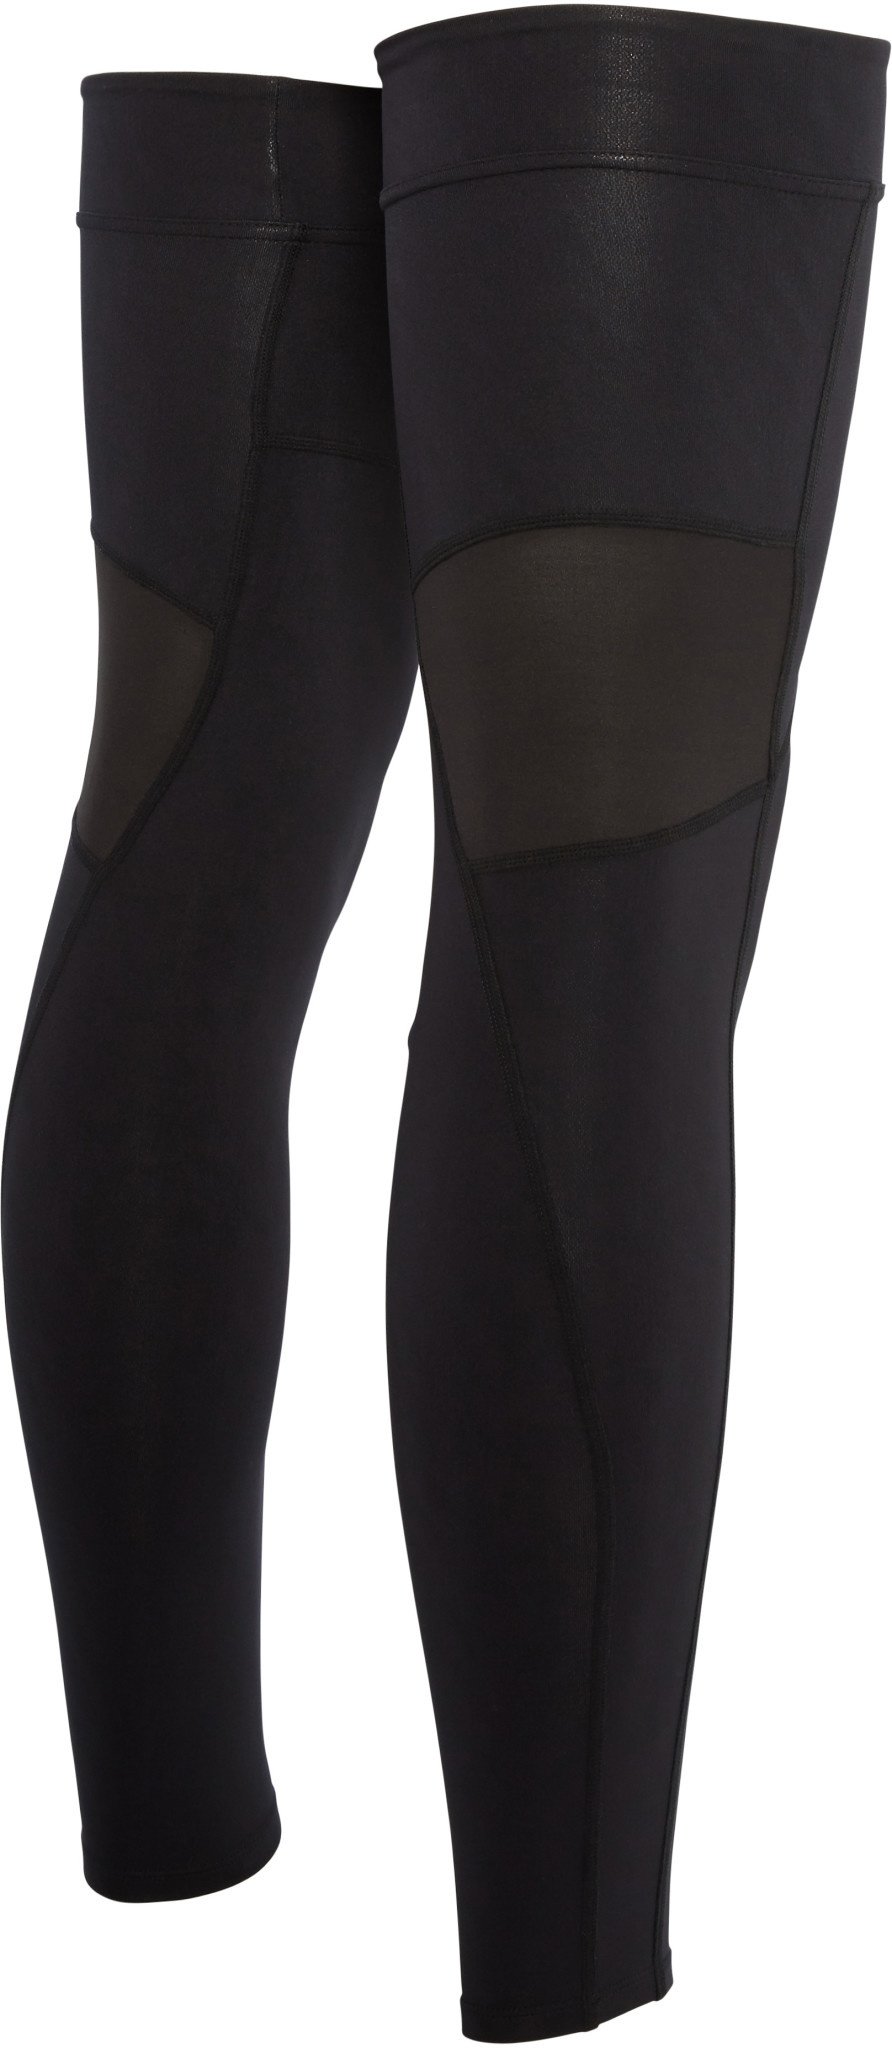 Madison Sportive Thermal leg-warmers review